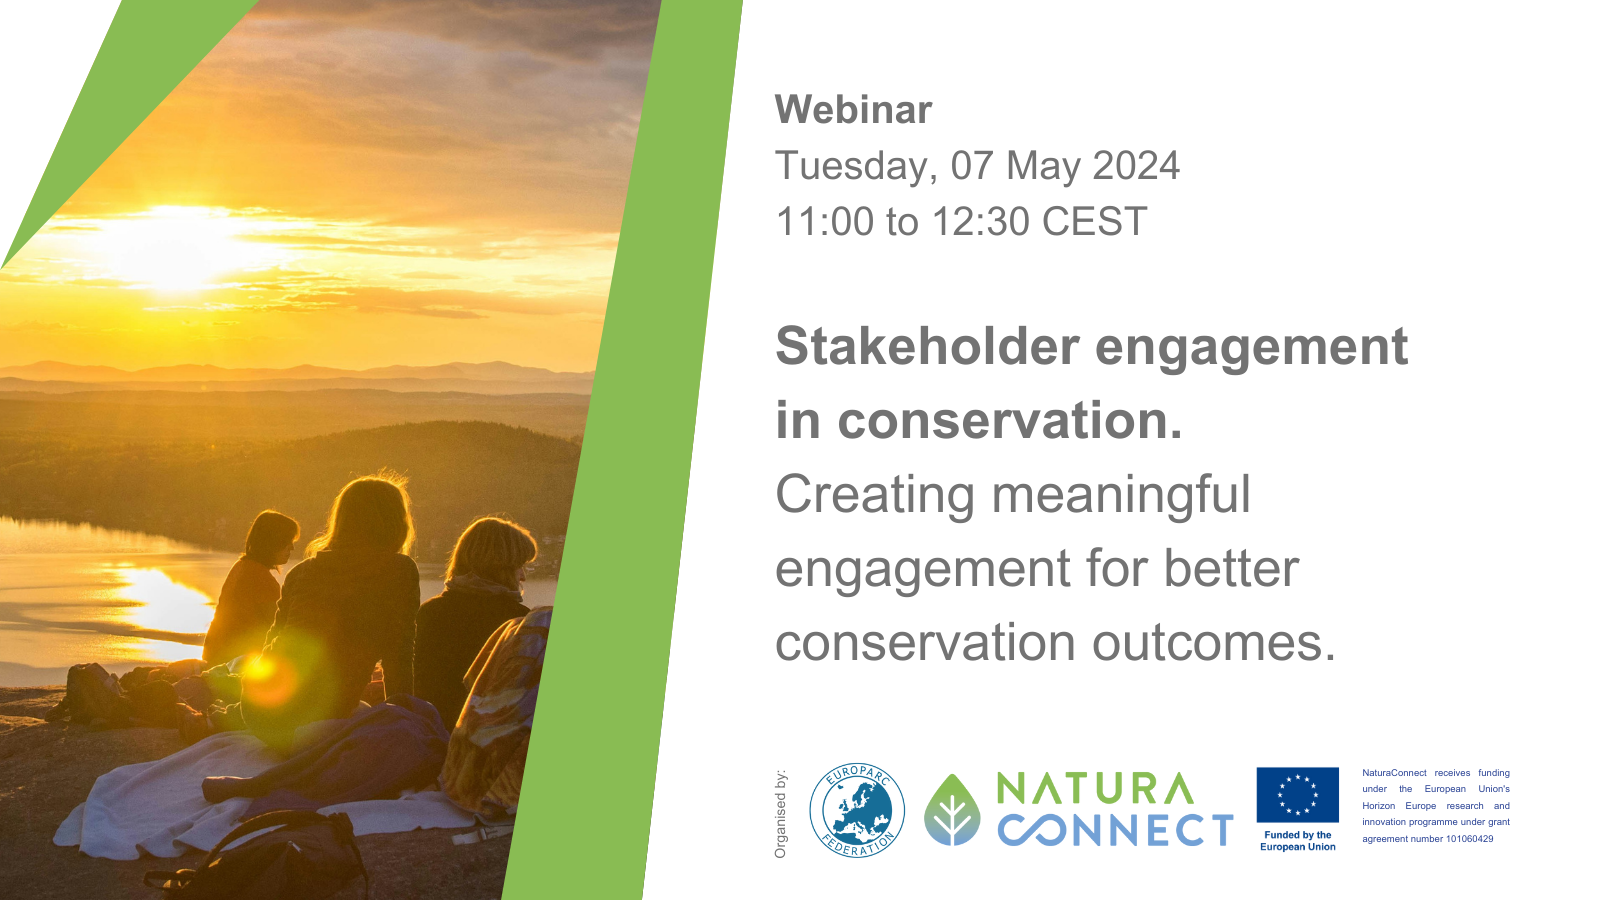 Webinar - Stakeholder engagement in conservation. Creating meaningful engagement for better conservation outcomes.